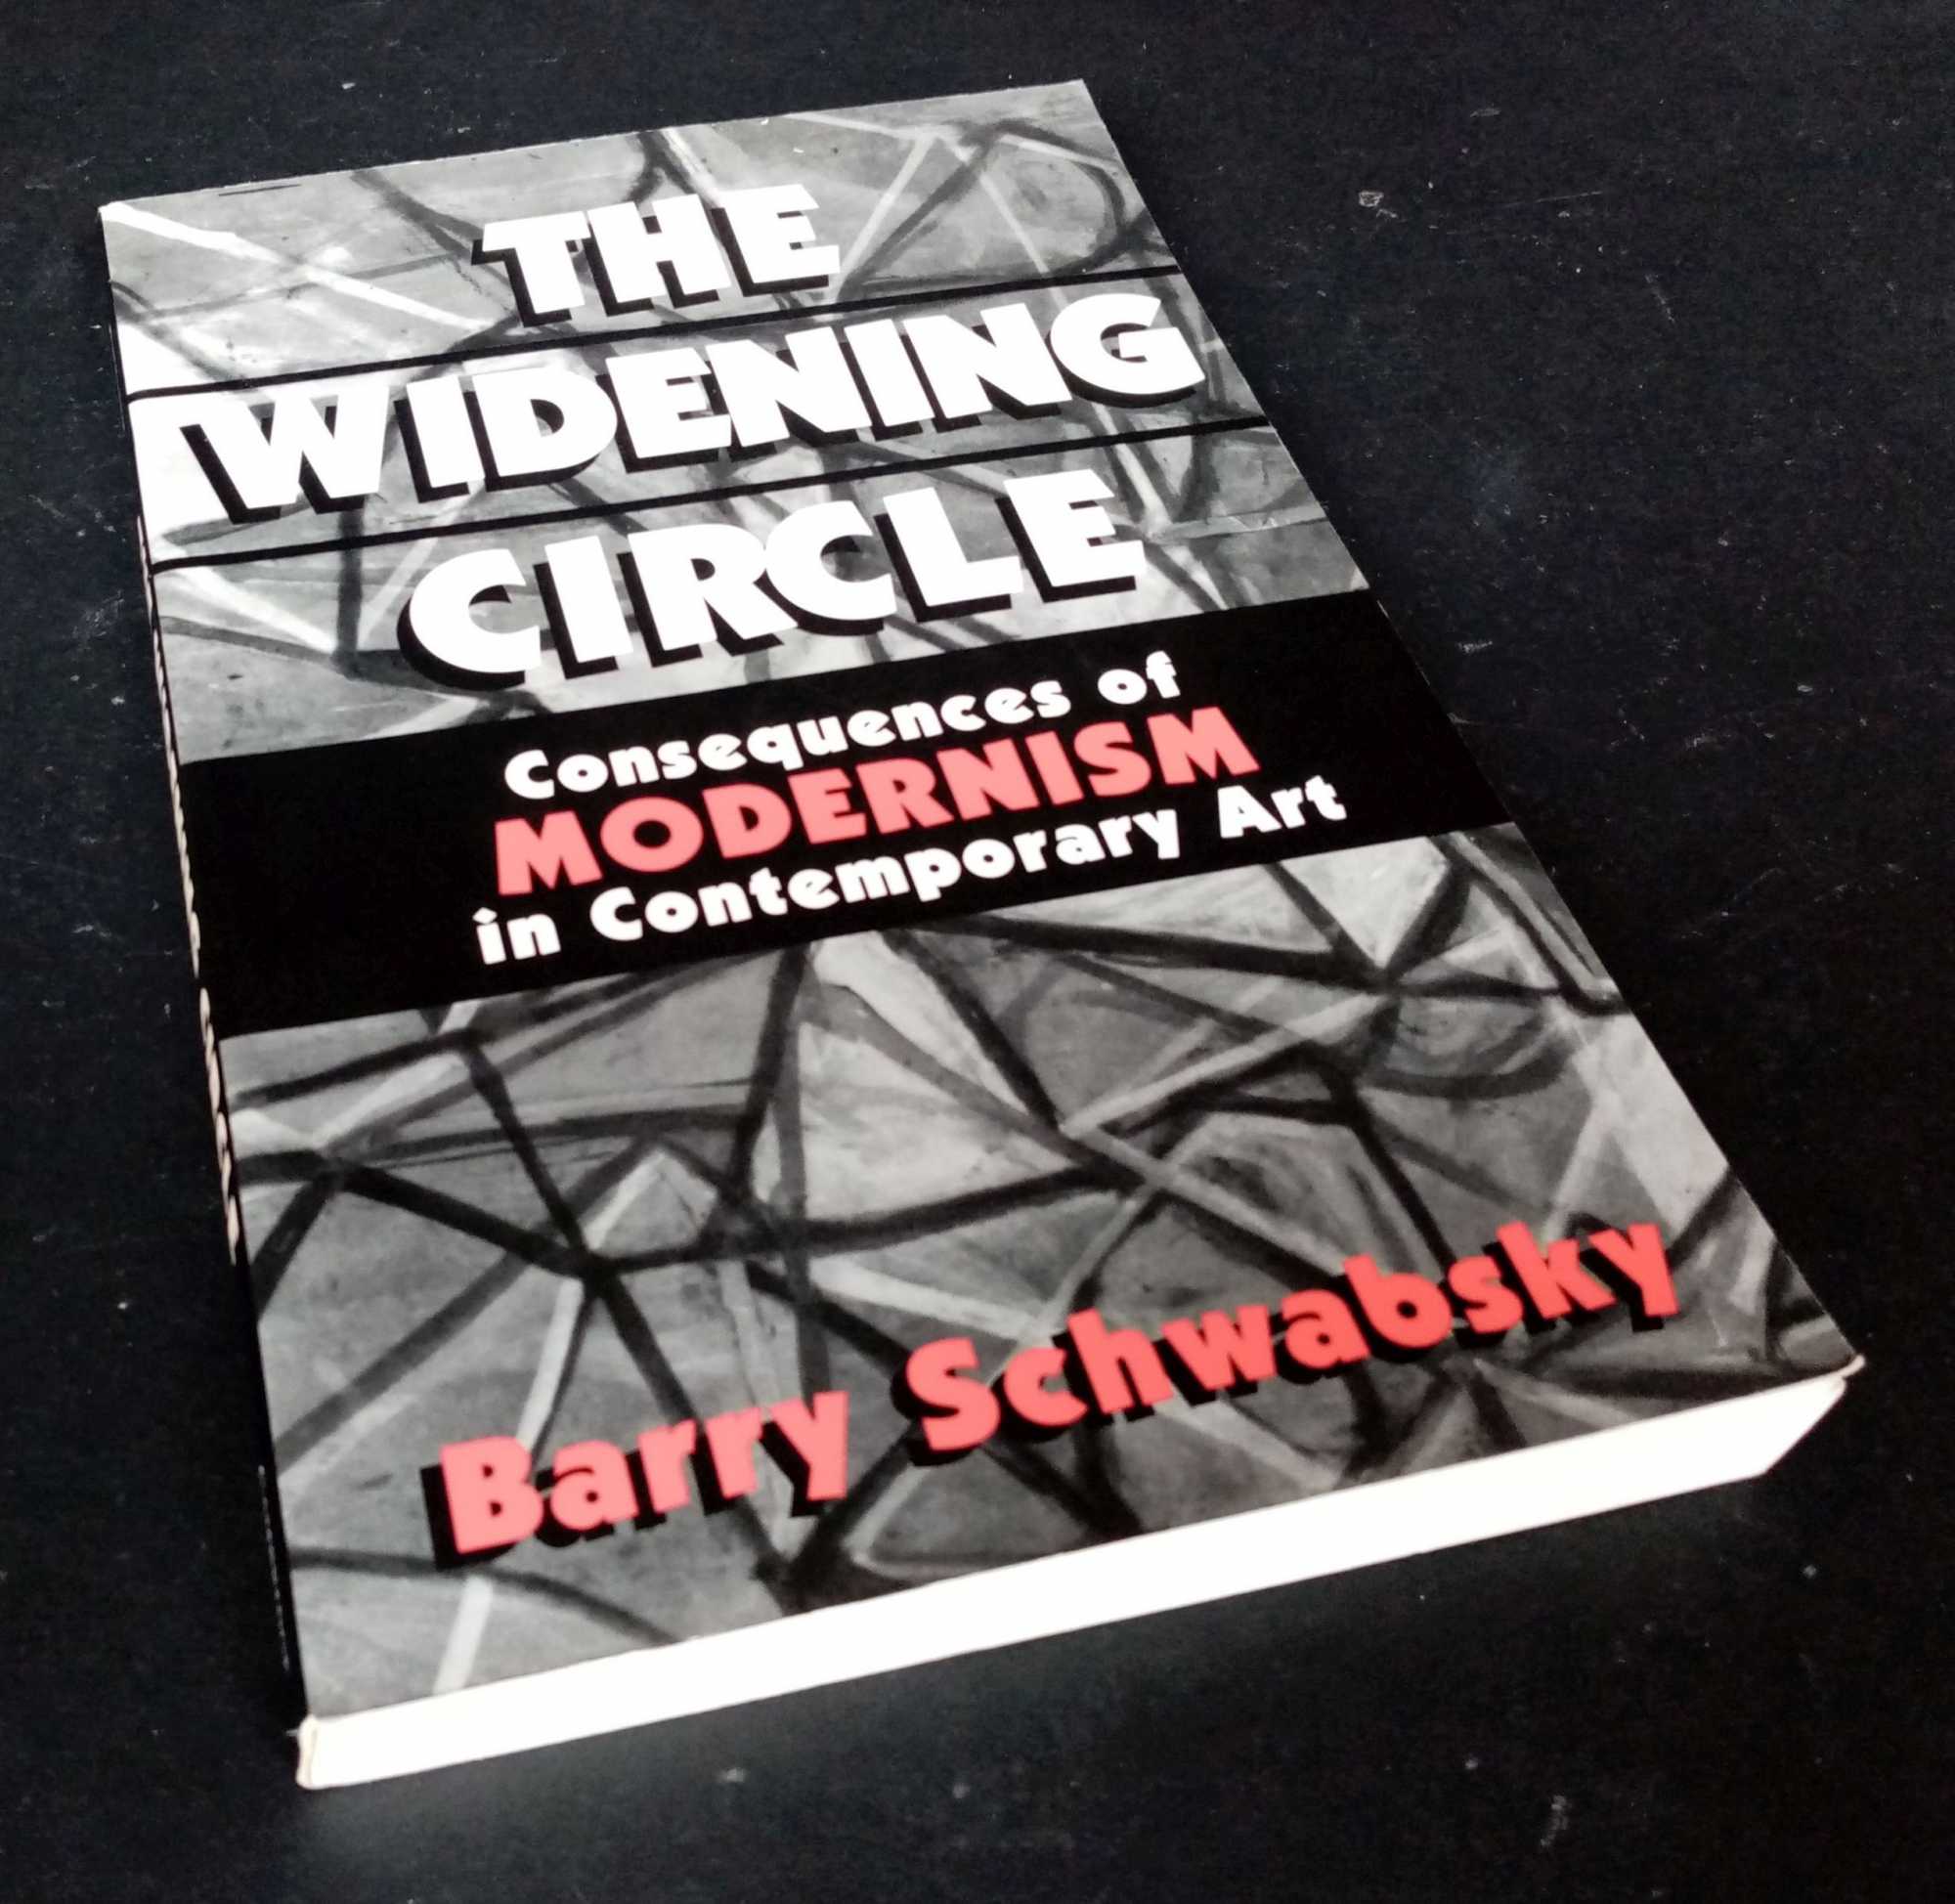 Barry Schwabsky - The Widening Circle: The Consequences of Modernism in Contemporary Art